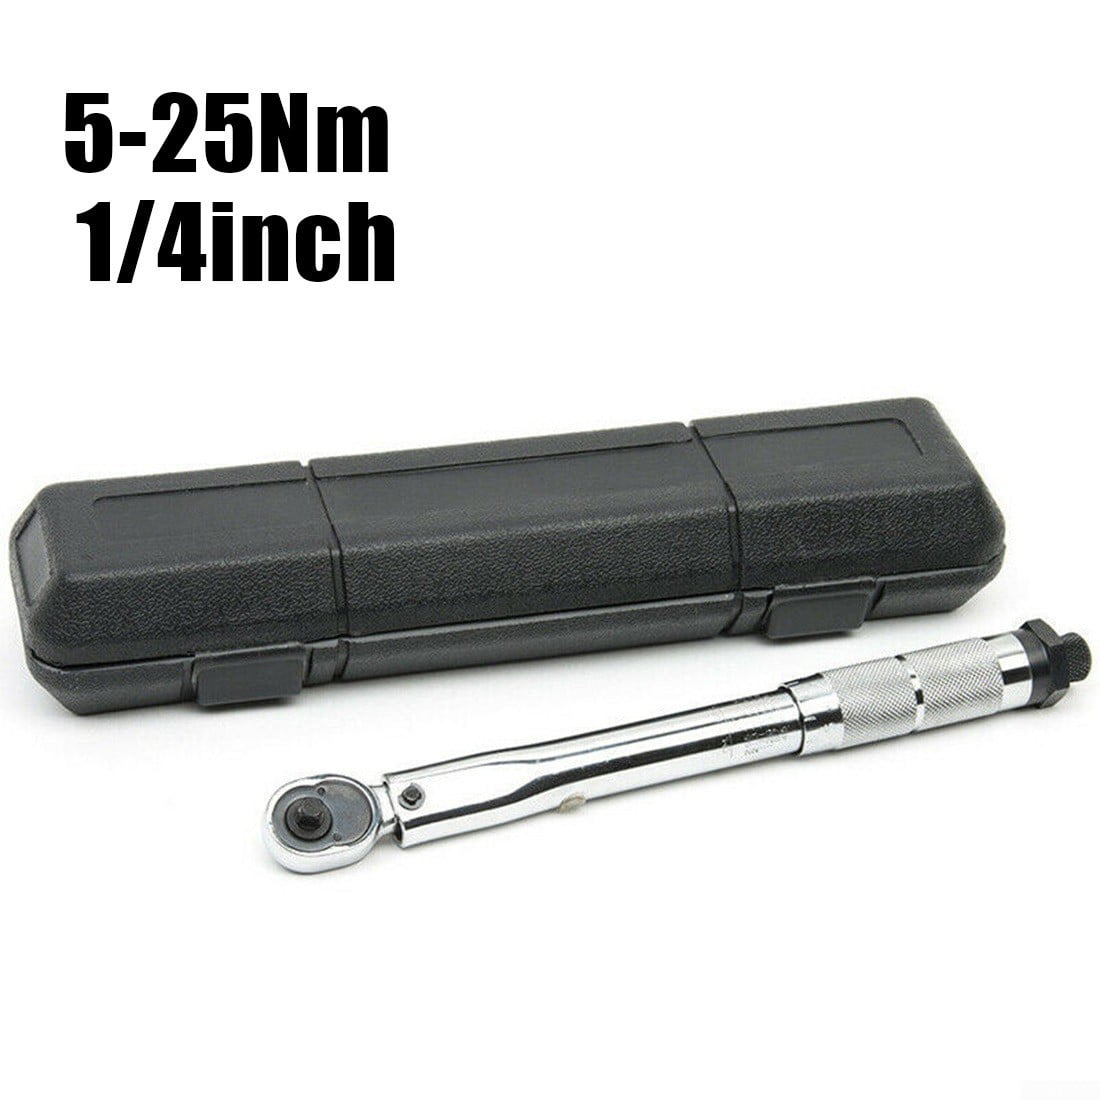 Adjustable Torque Wrench 5-25Nm 1/4" Square Drive Click Hand Ratchet Tool Heiß 